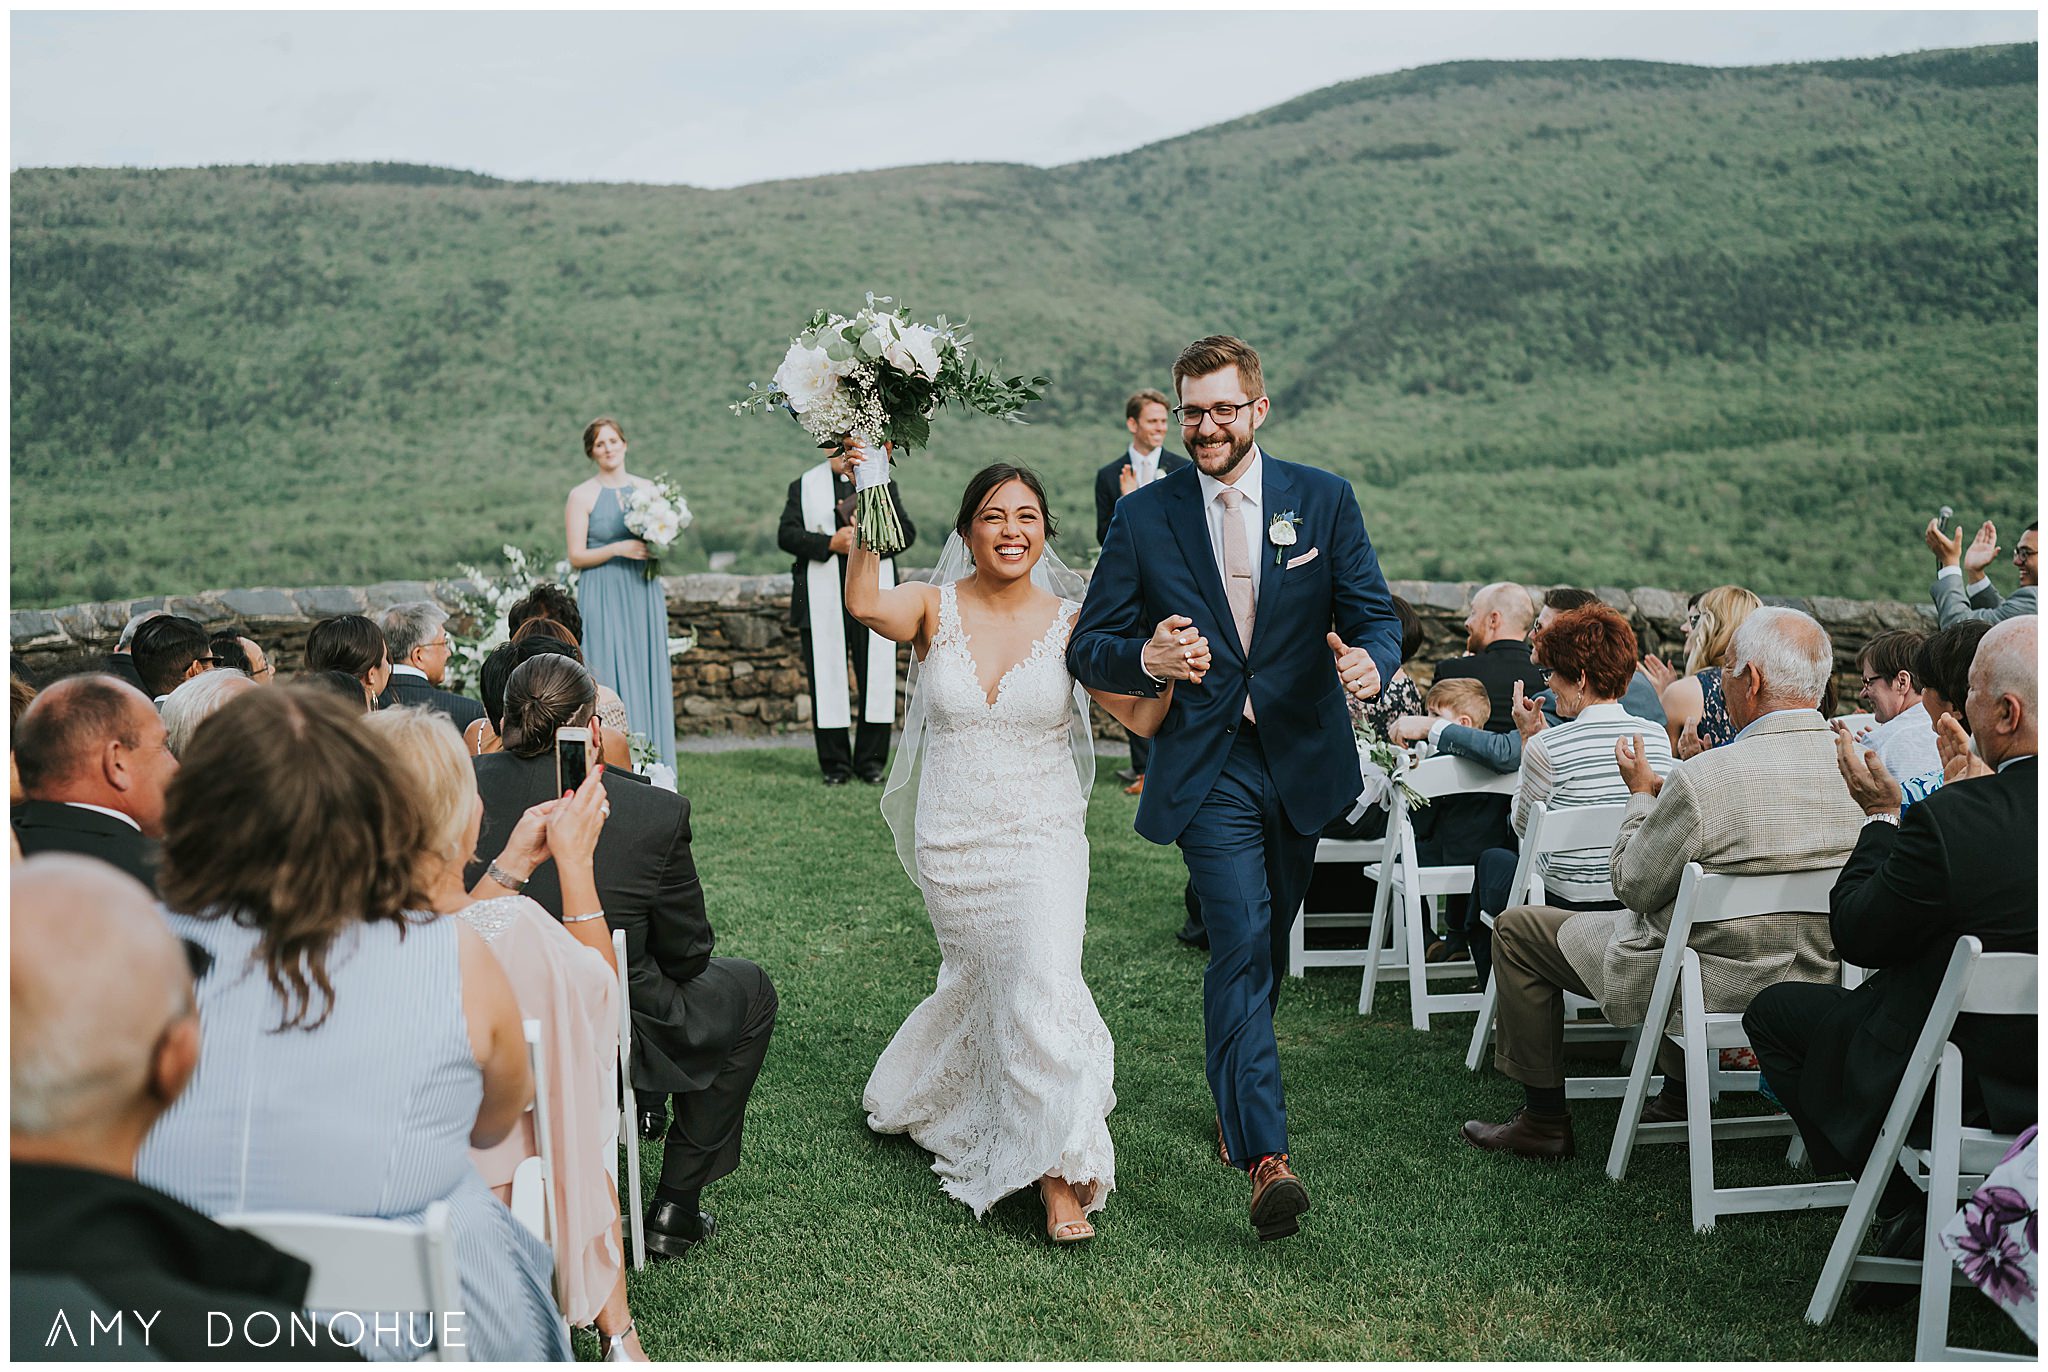 Wedding Ceremony at The Hildene in Manchester, Vermont